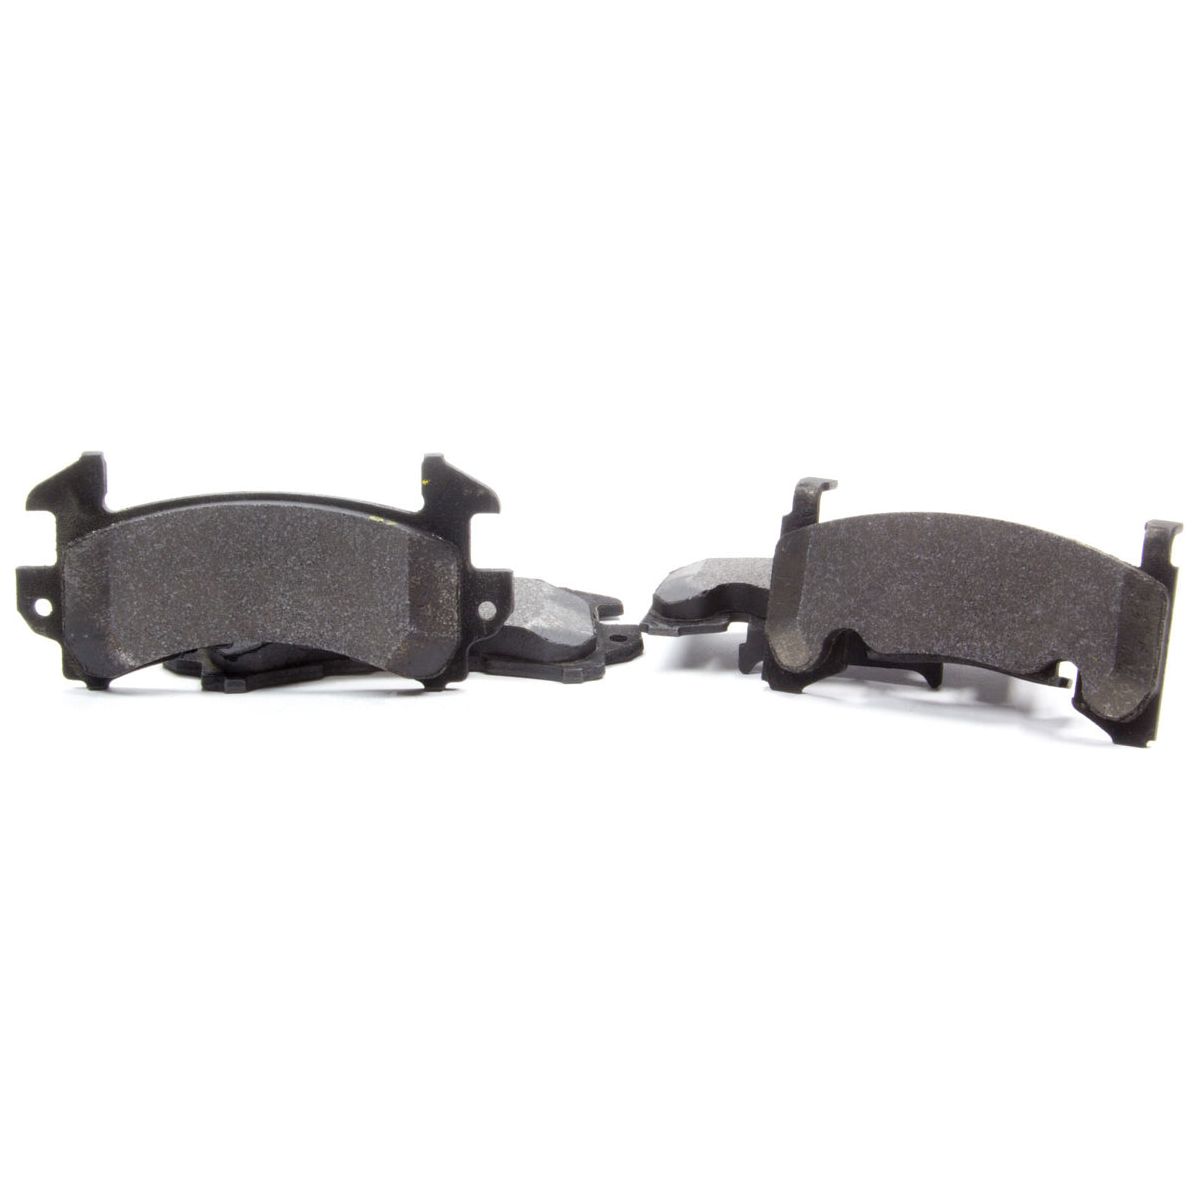 PFC BRAKE PADS PFR0154.97.14.44 Front, 97 Compound, All Temperatures, Various GM Applications, Set of 4